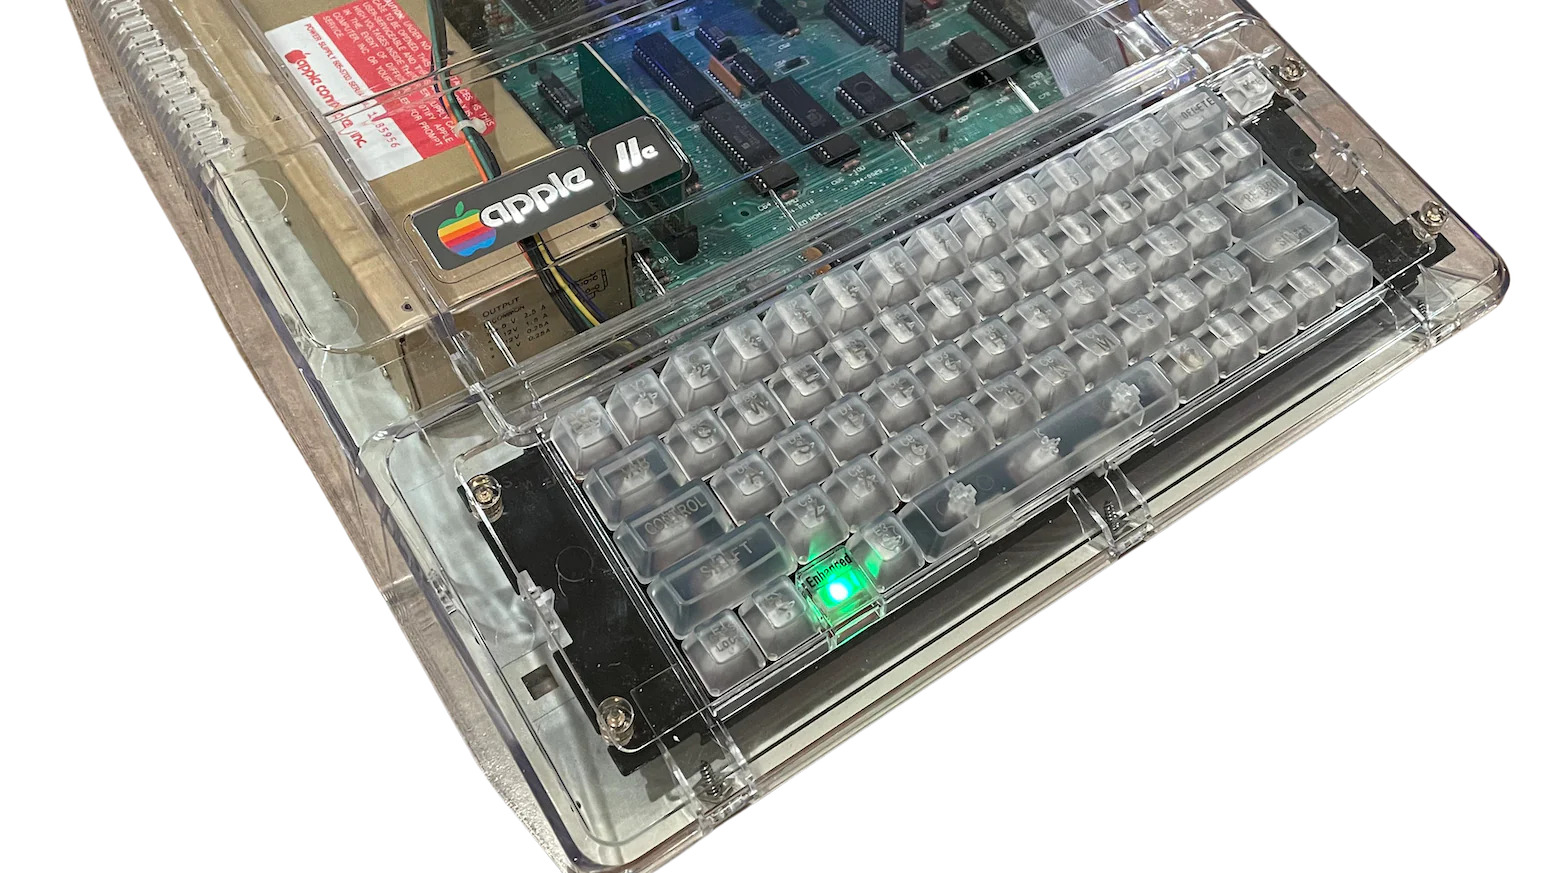 MacEffects Chrome / Clear Mechanical Keyboard for Vintage Apple IIe Computers